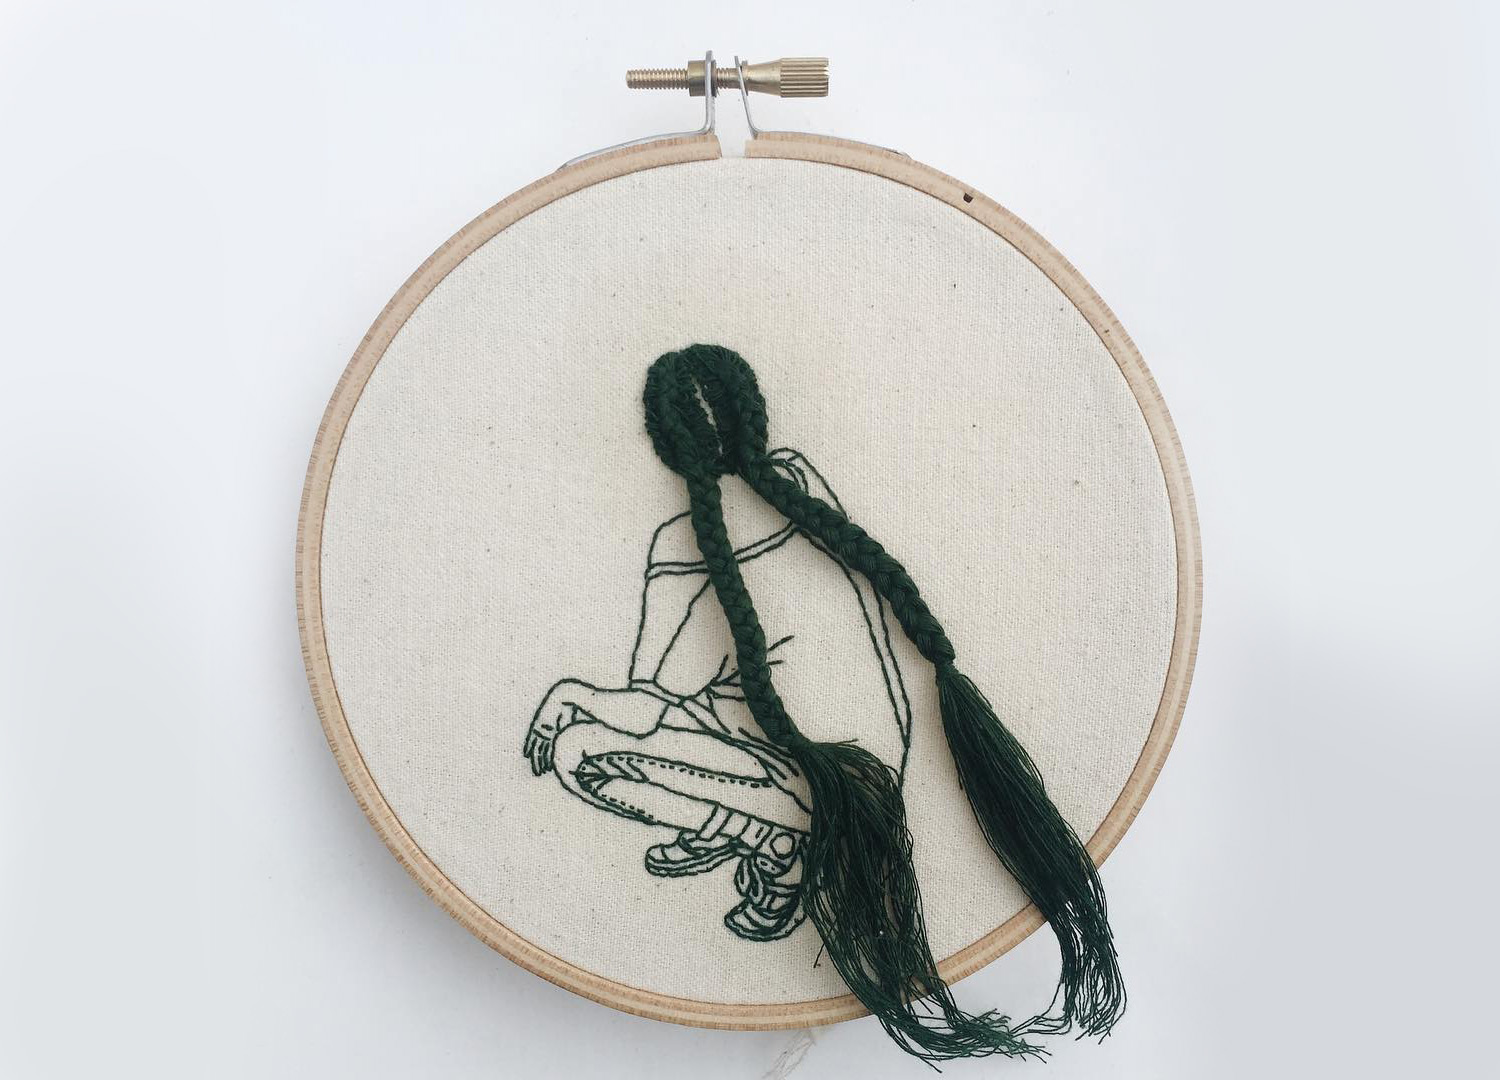 Embroidery by Sheena Liam